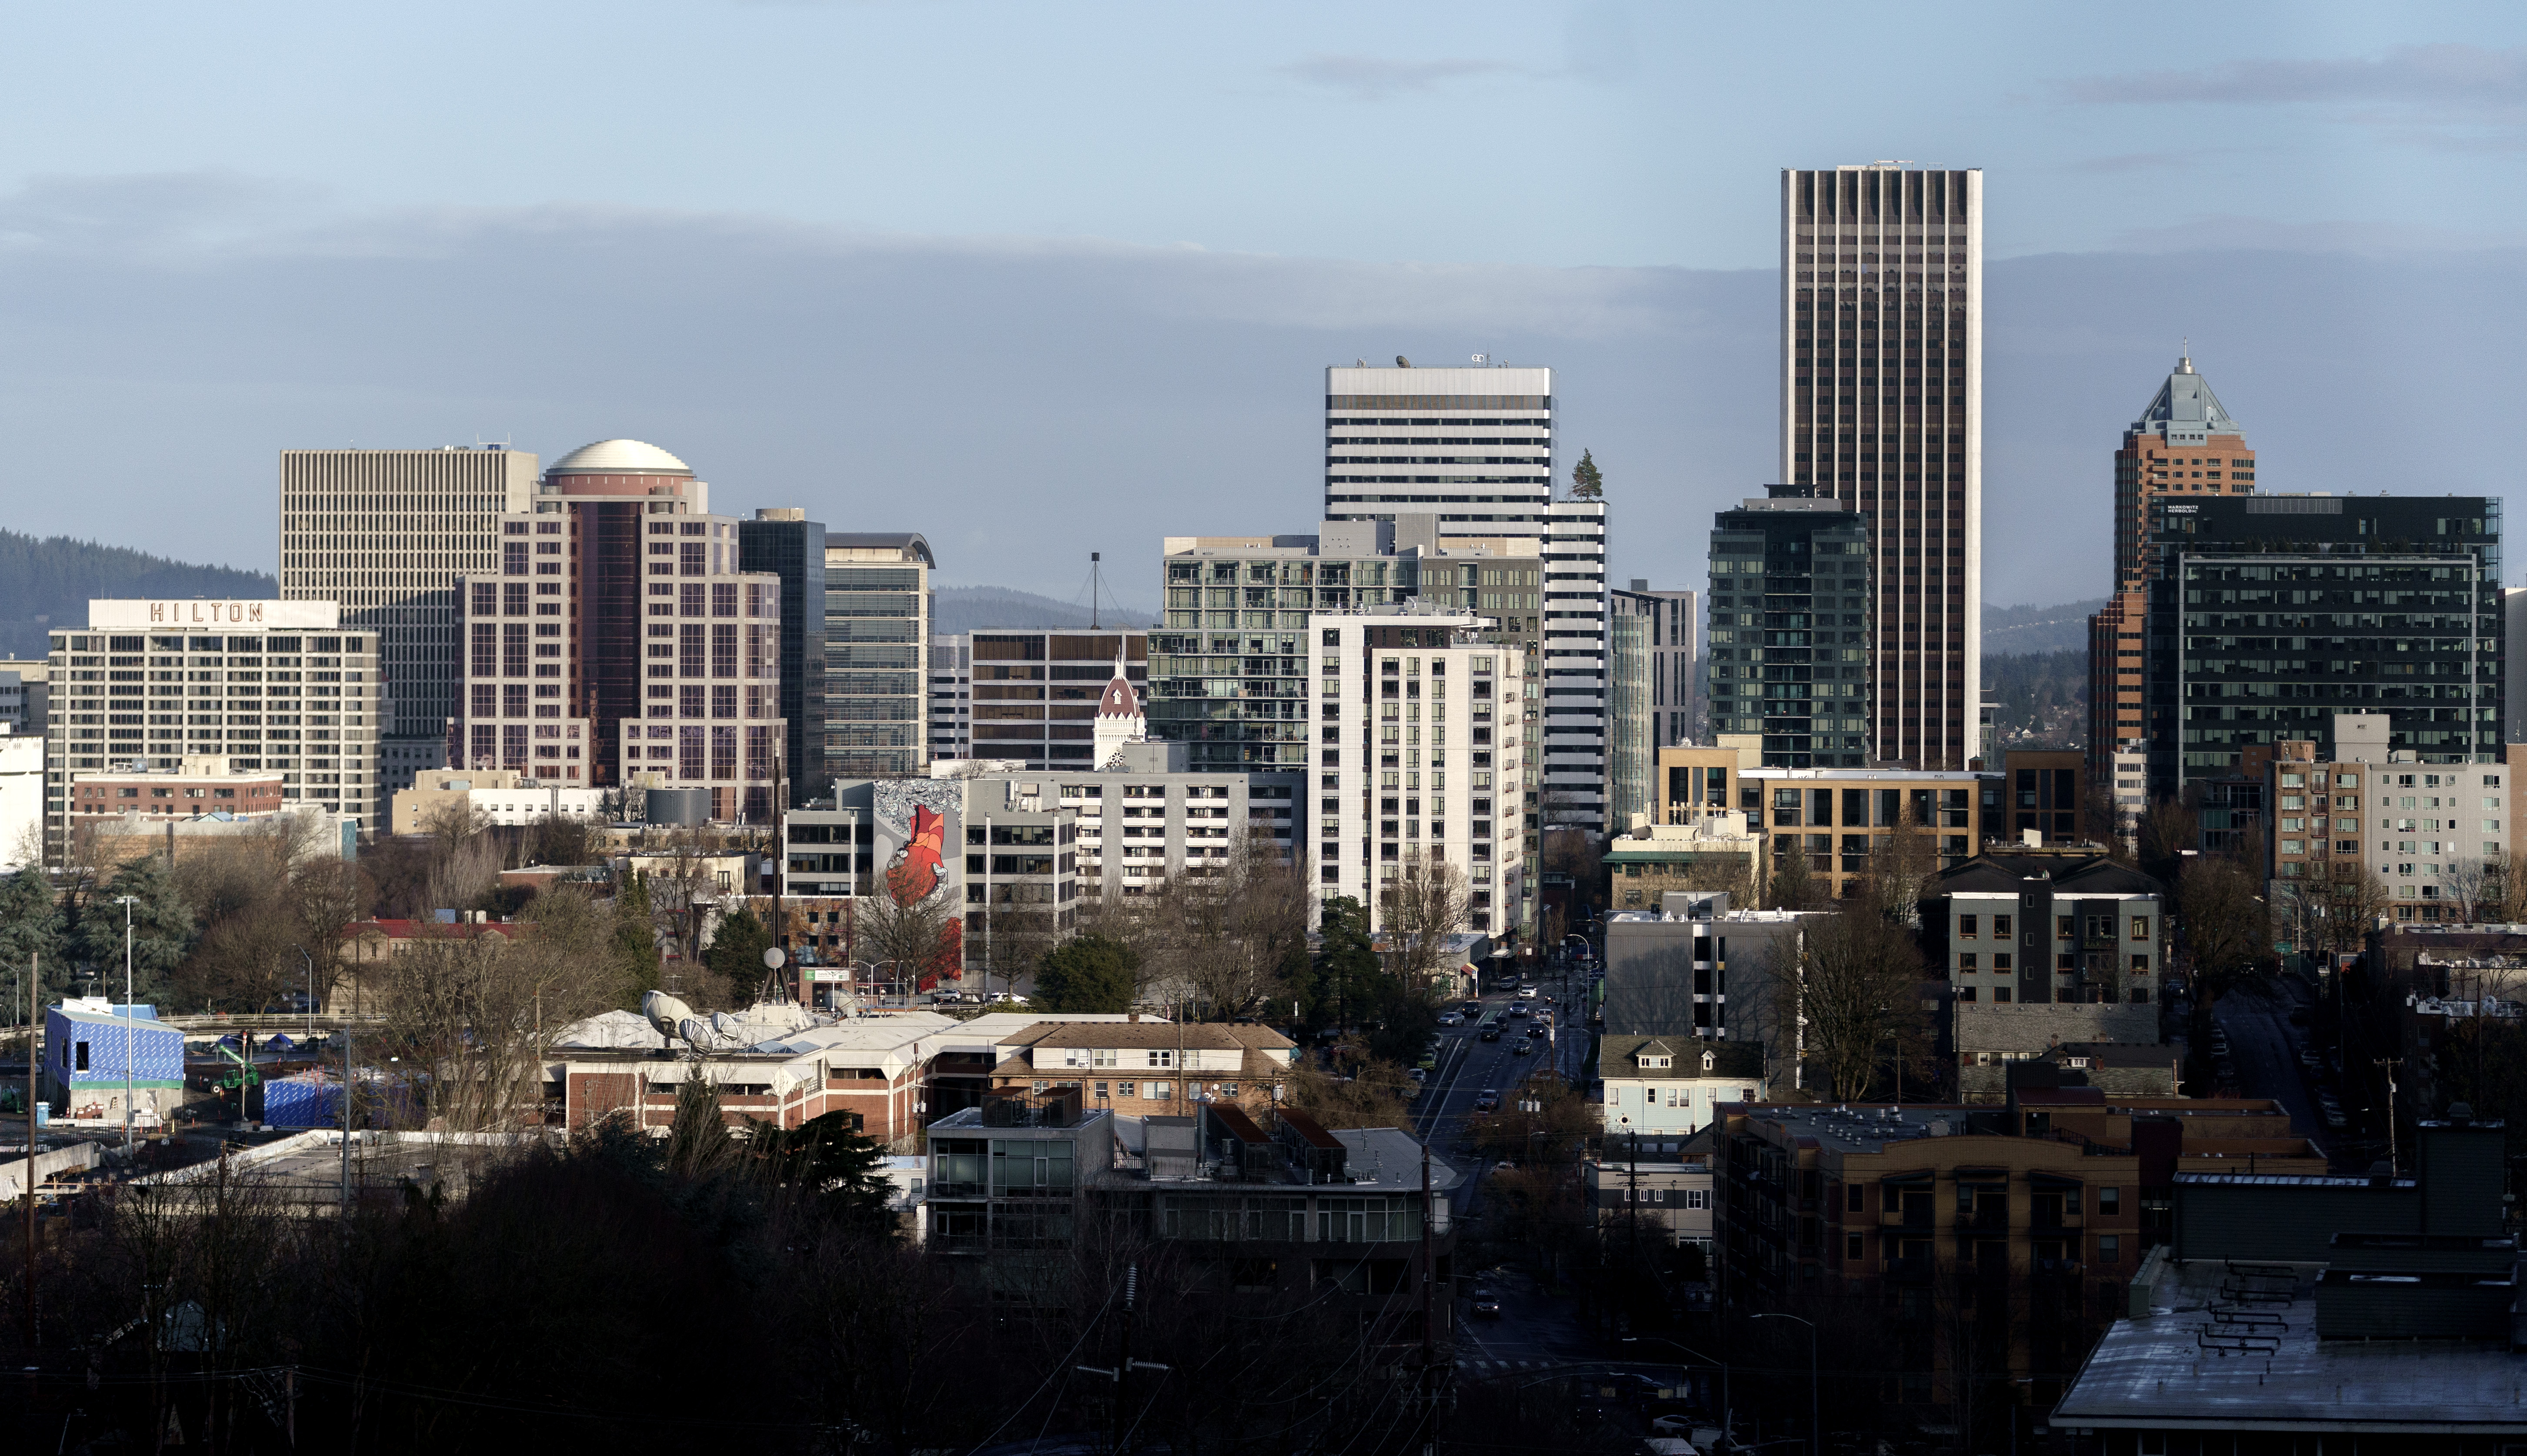 Survey shows Portland voters think city is going in wrong direction - OPB